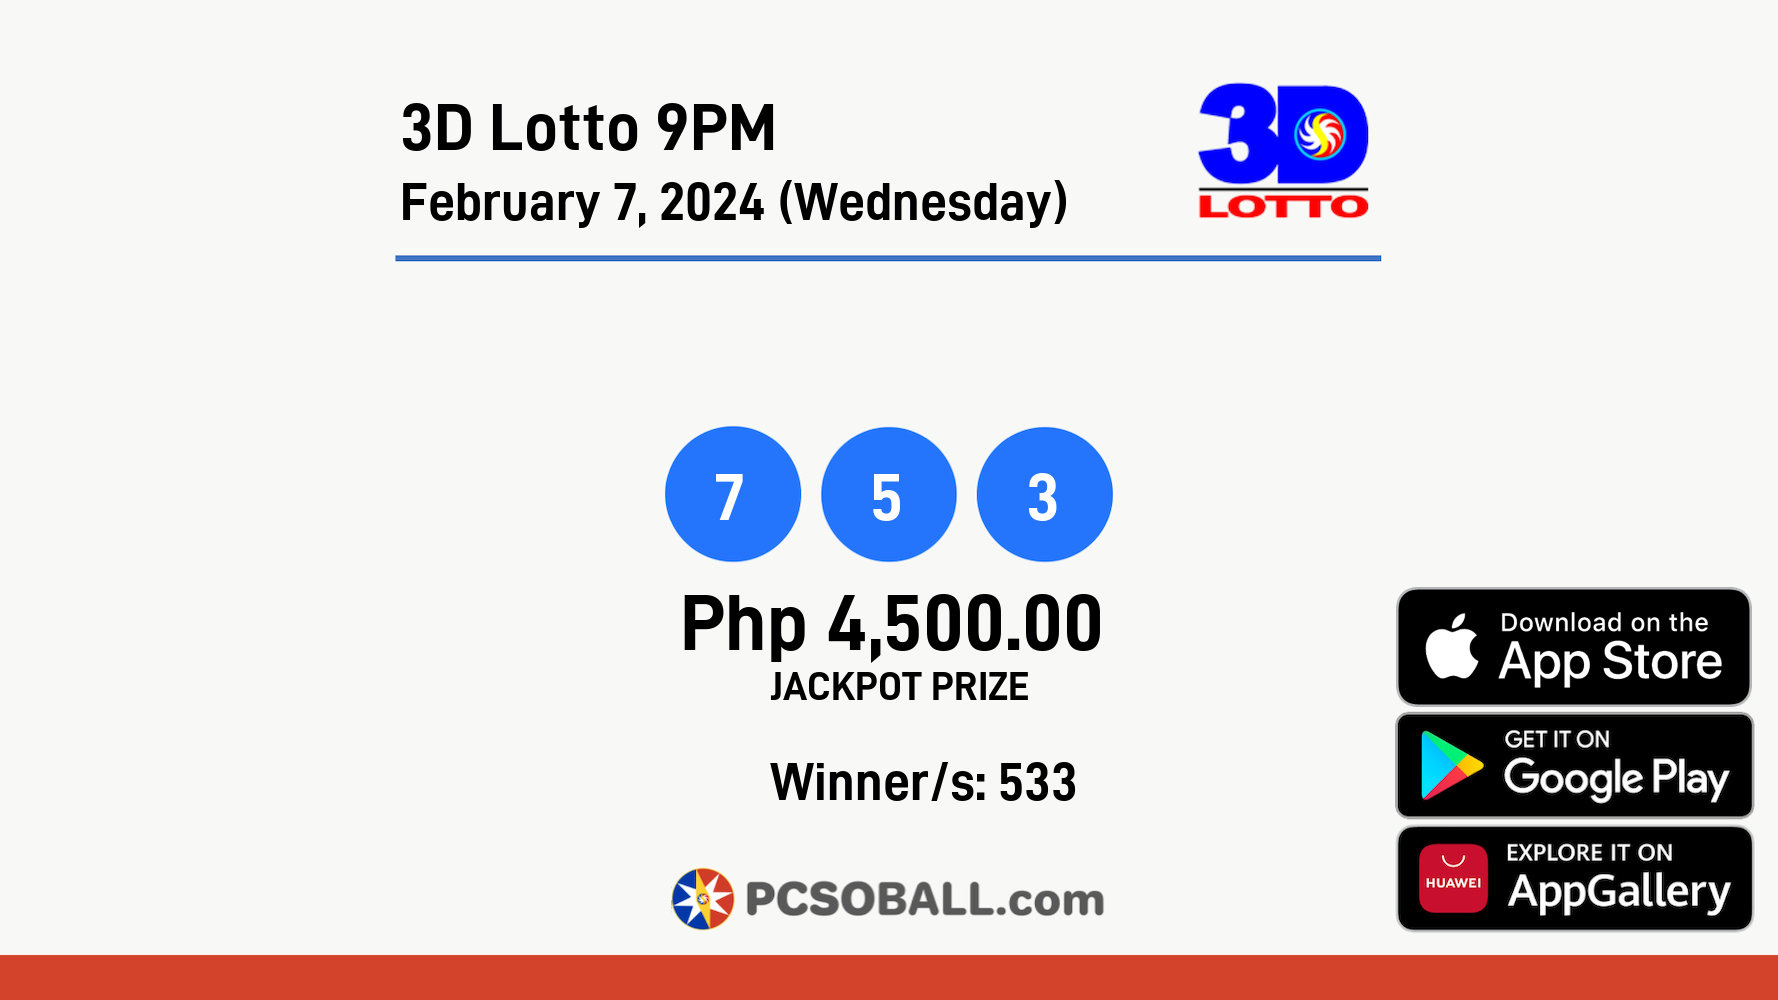 3D Lotto 9PM February 7, 2024 (Wednesday) Result